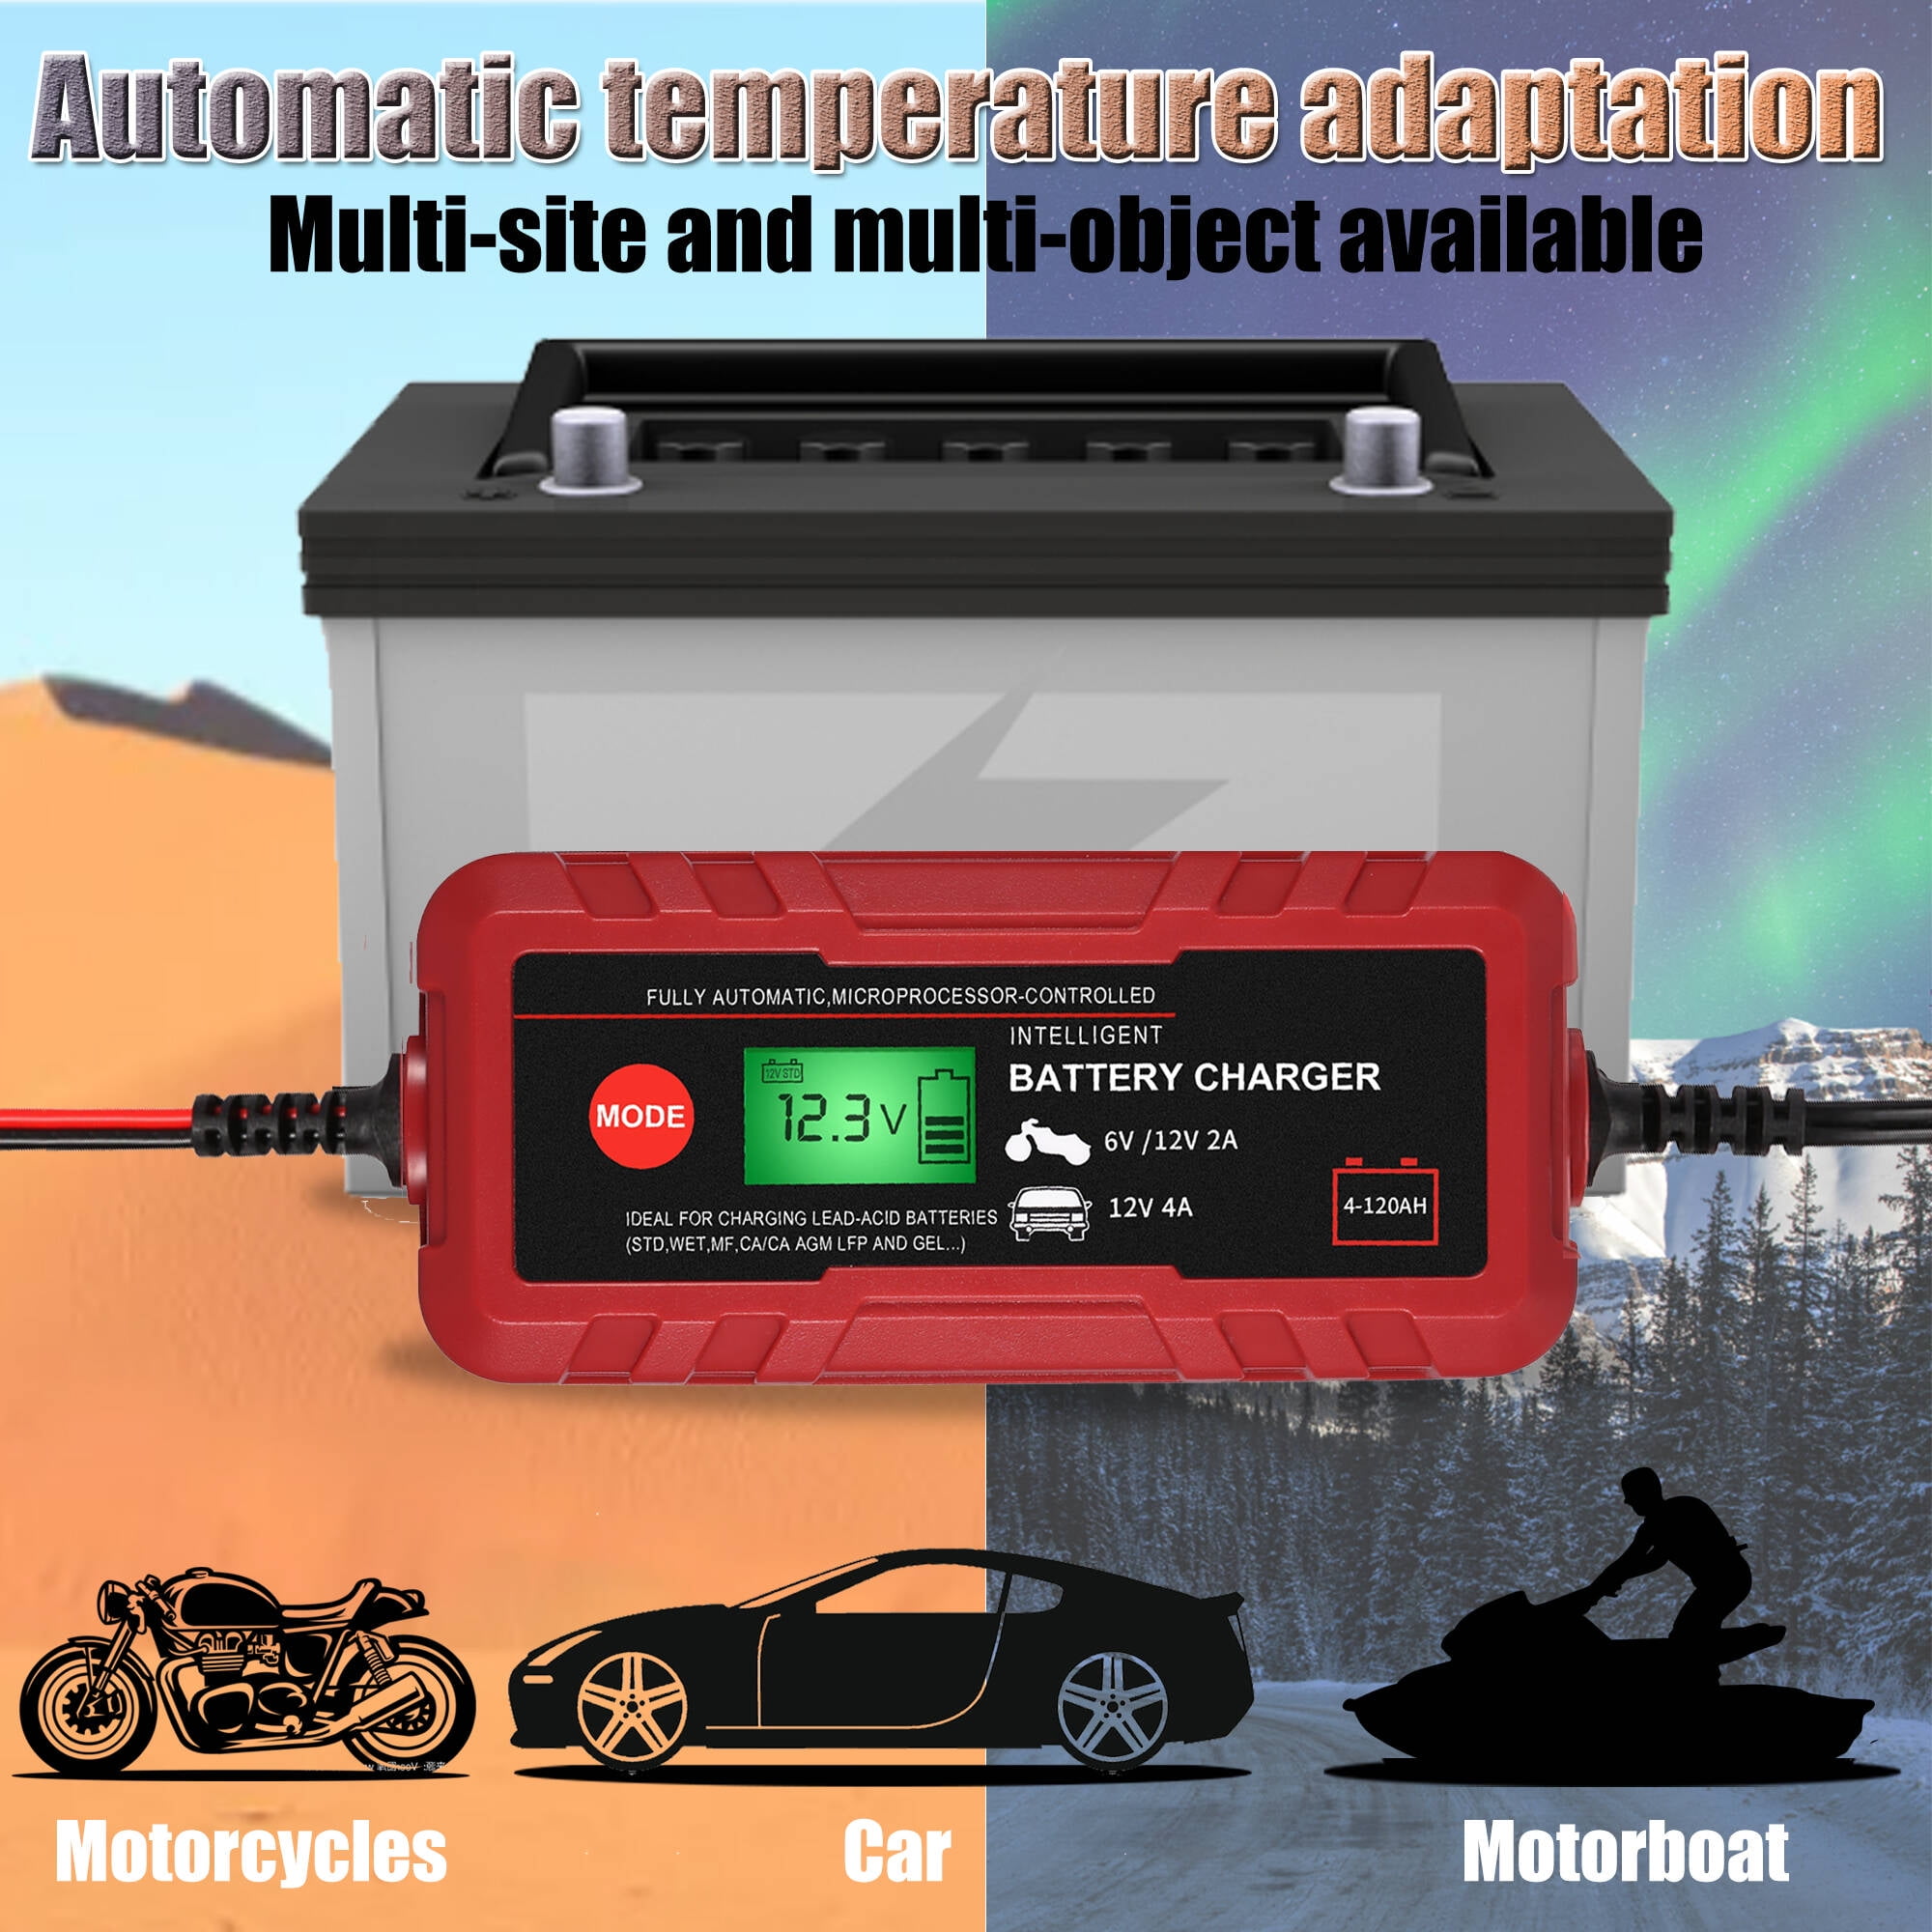 70W Fully Automatic Battery Charger, 6V/12V Lead-Acid Auto Batterys  Charger/Maintainer with LCD Digital Display/IP65 Protection for Car,  Motorcycle